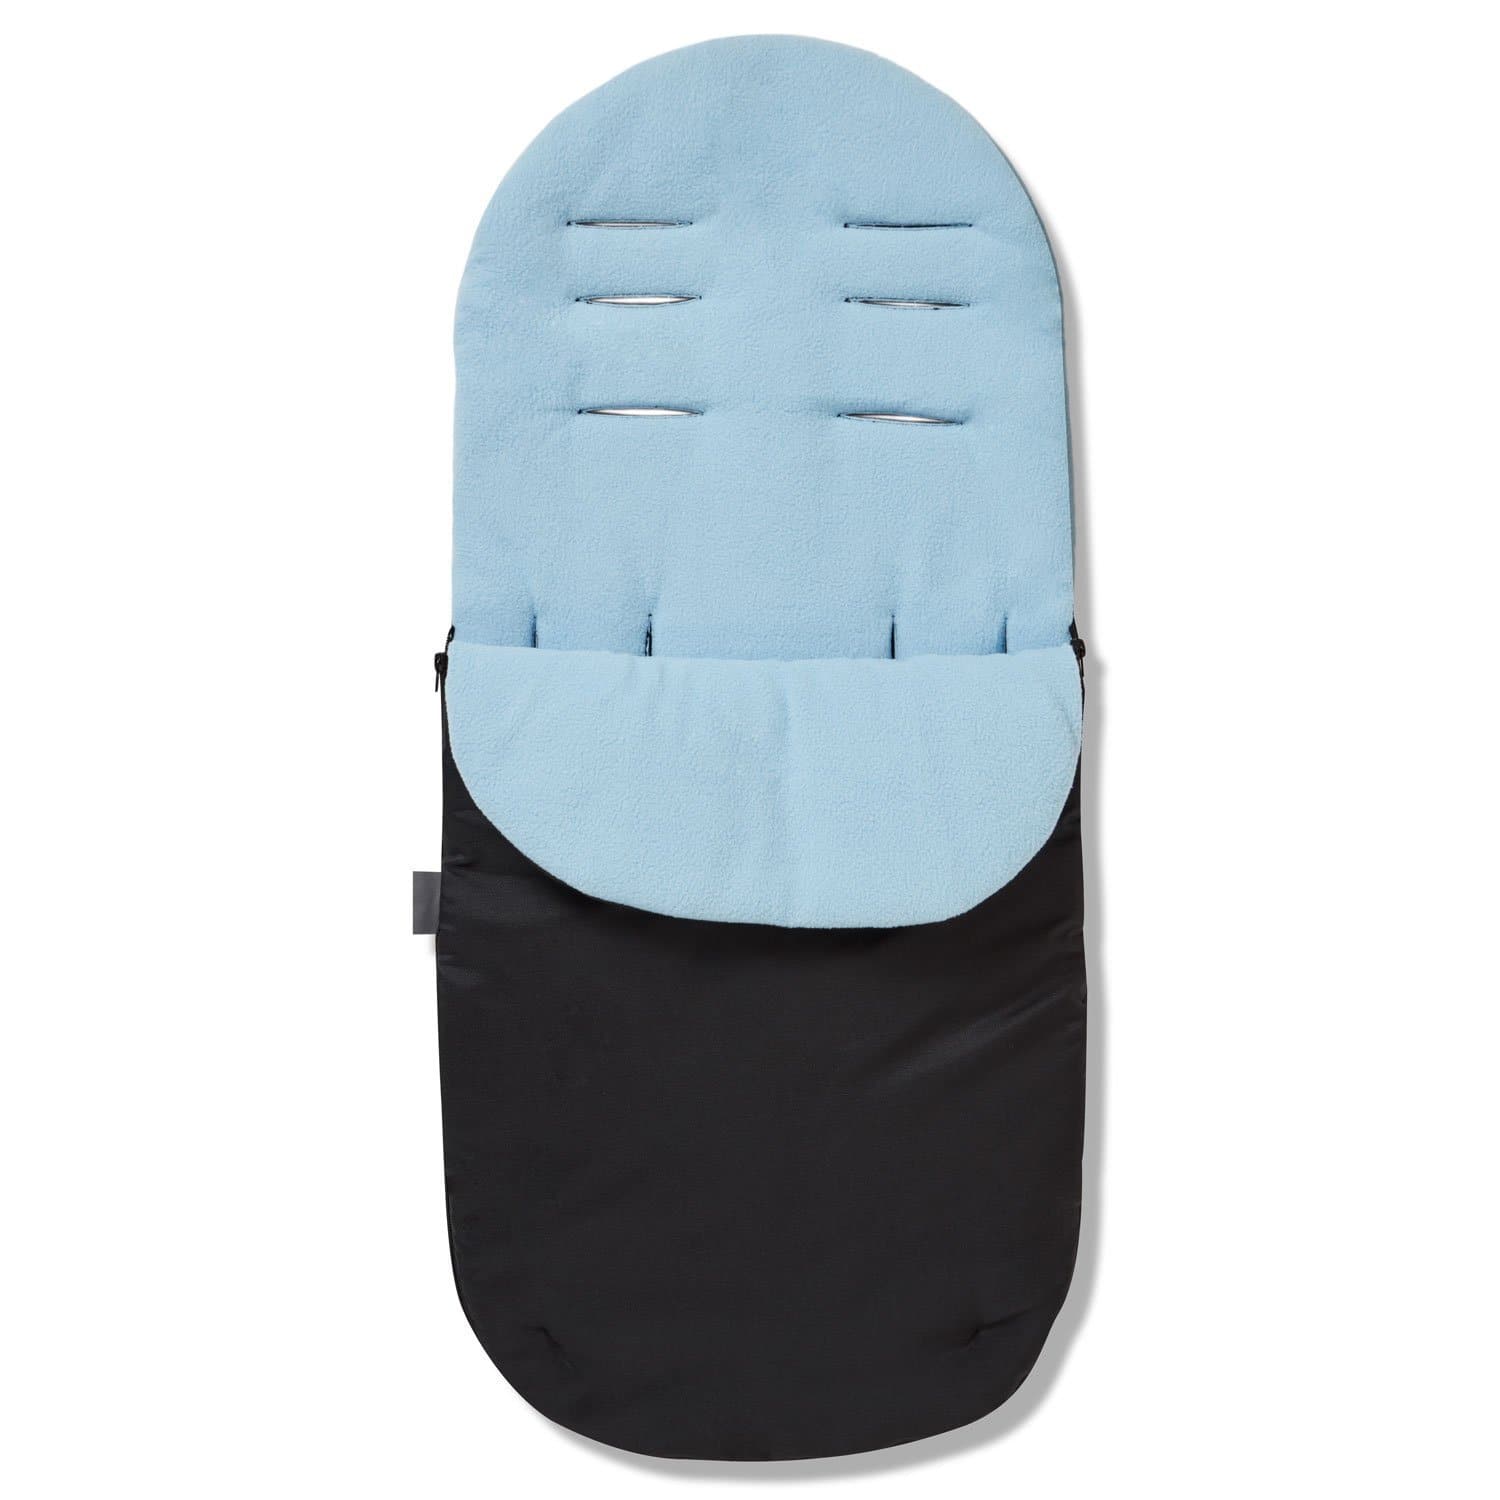 Footmuff / Cosy Toes Compatible with Phil & Teds - Light Blue / Fits All Models | For Your Little One